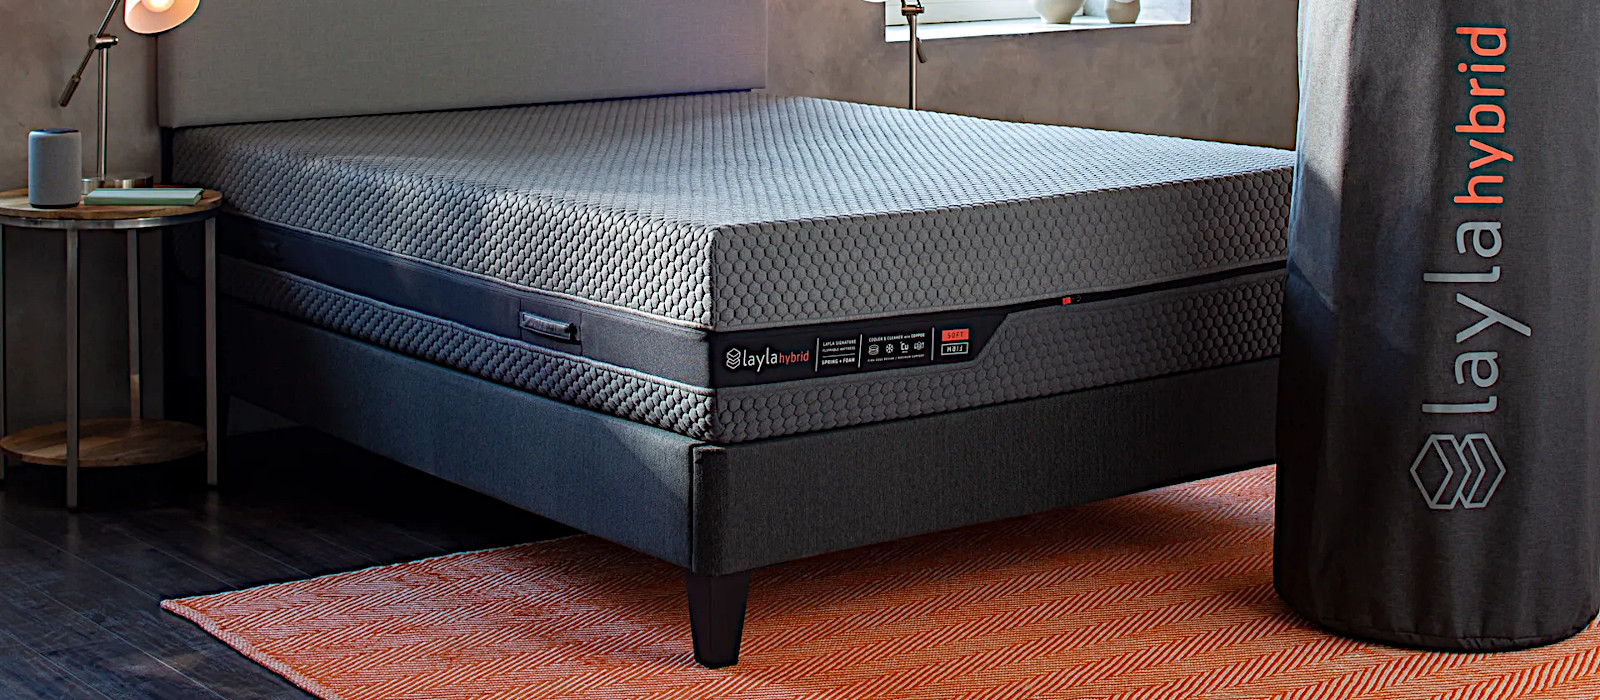 copper infused flippable hybrid mattress cost-effective